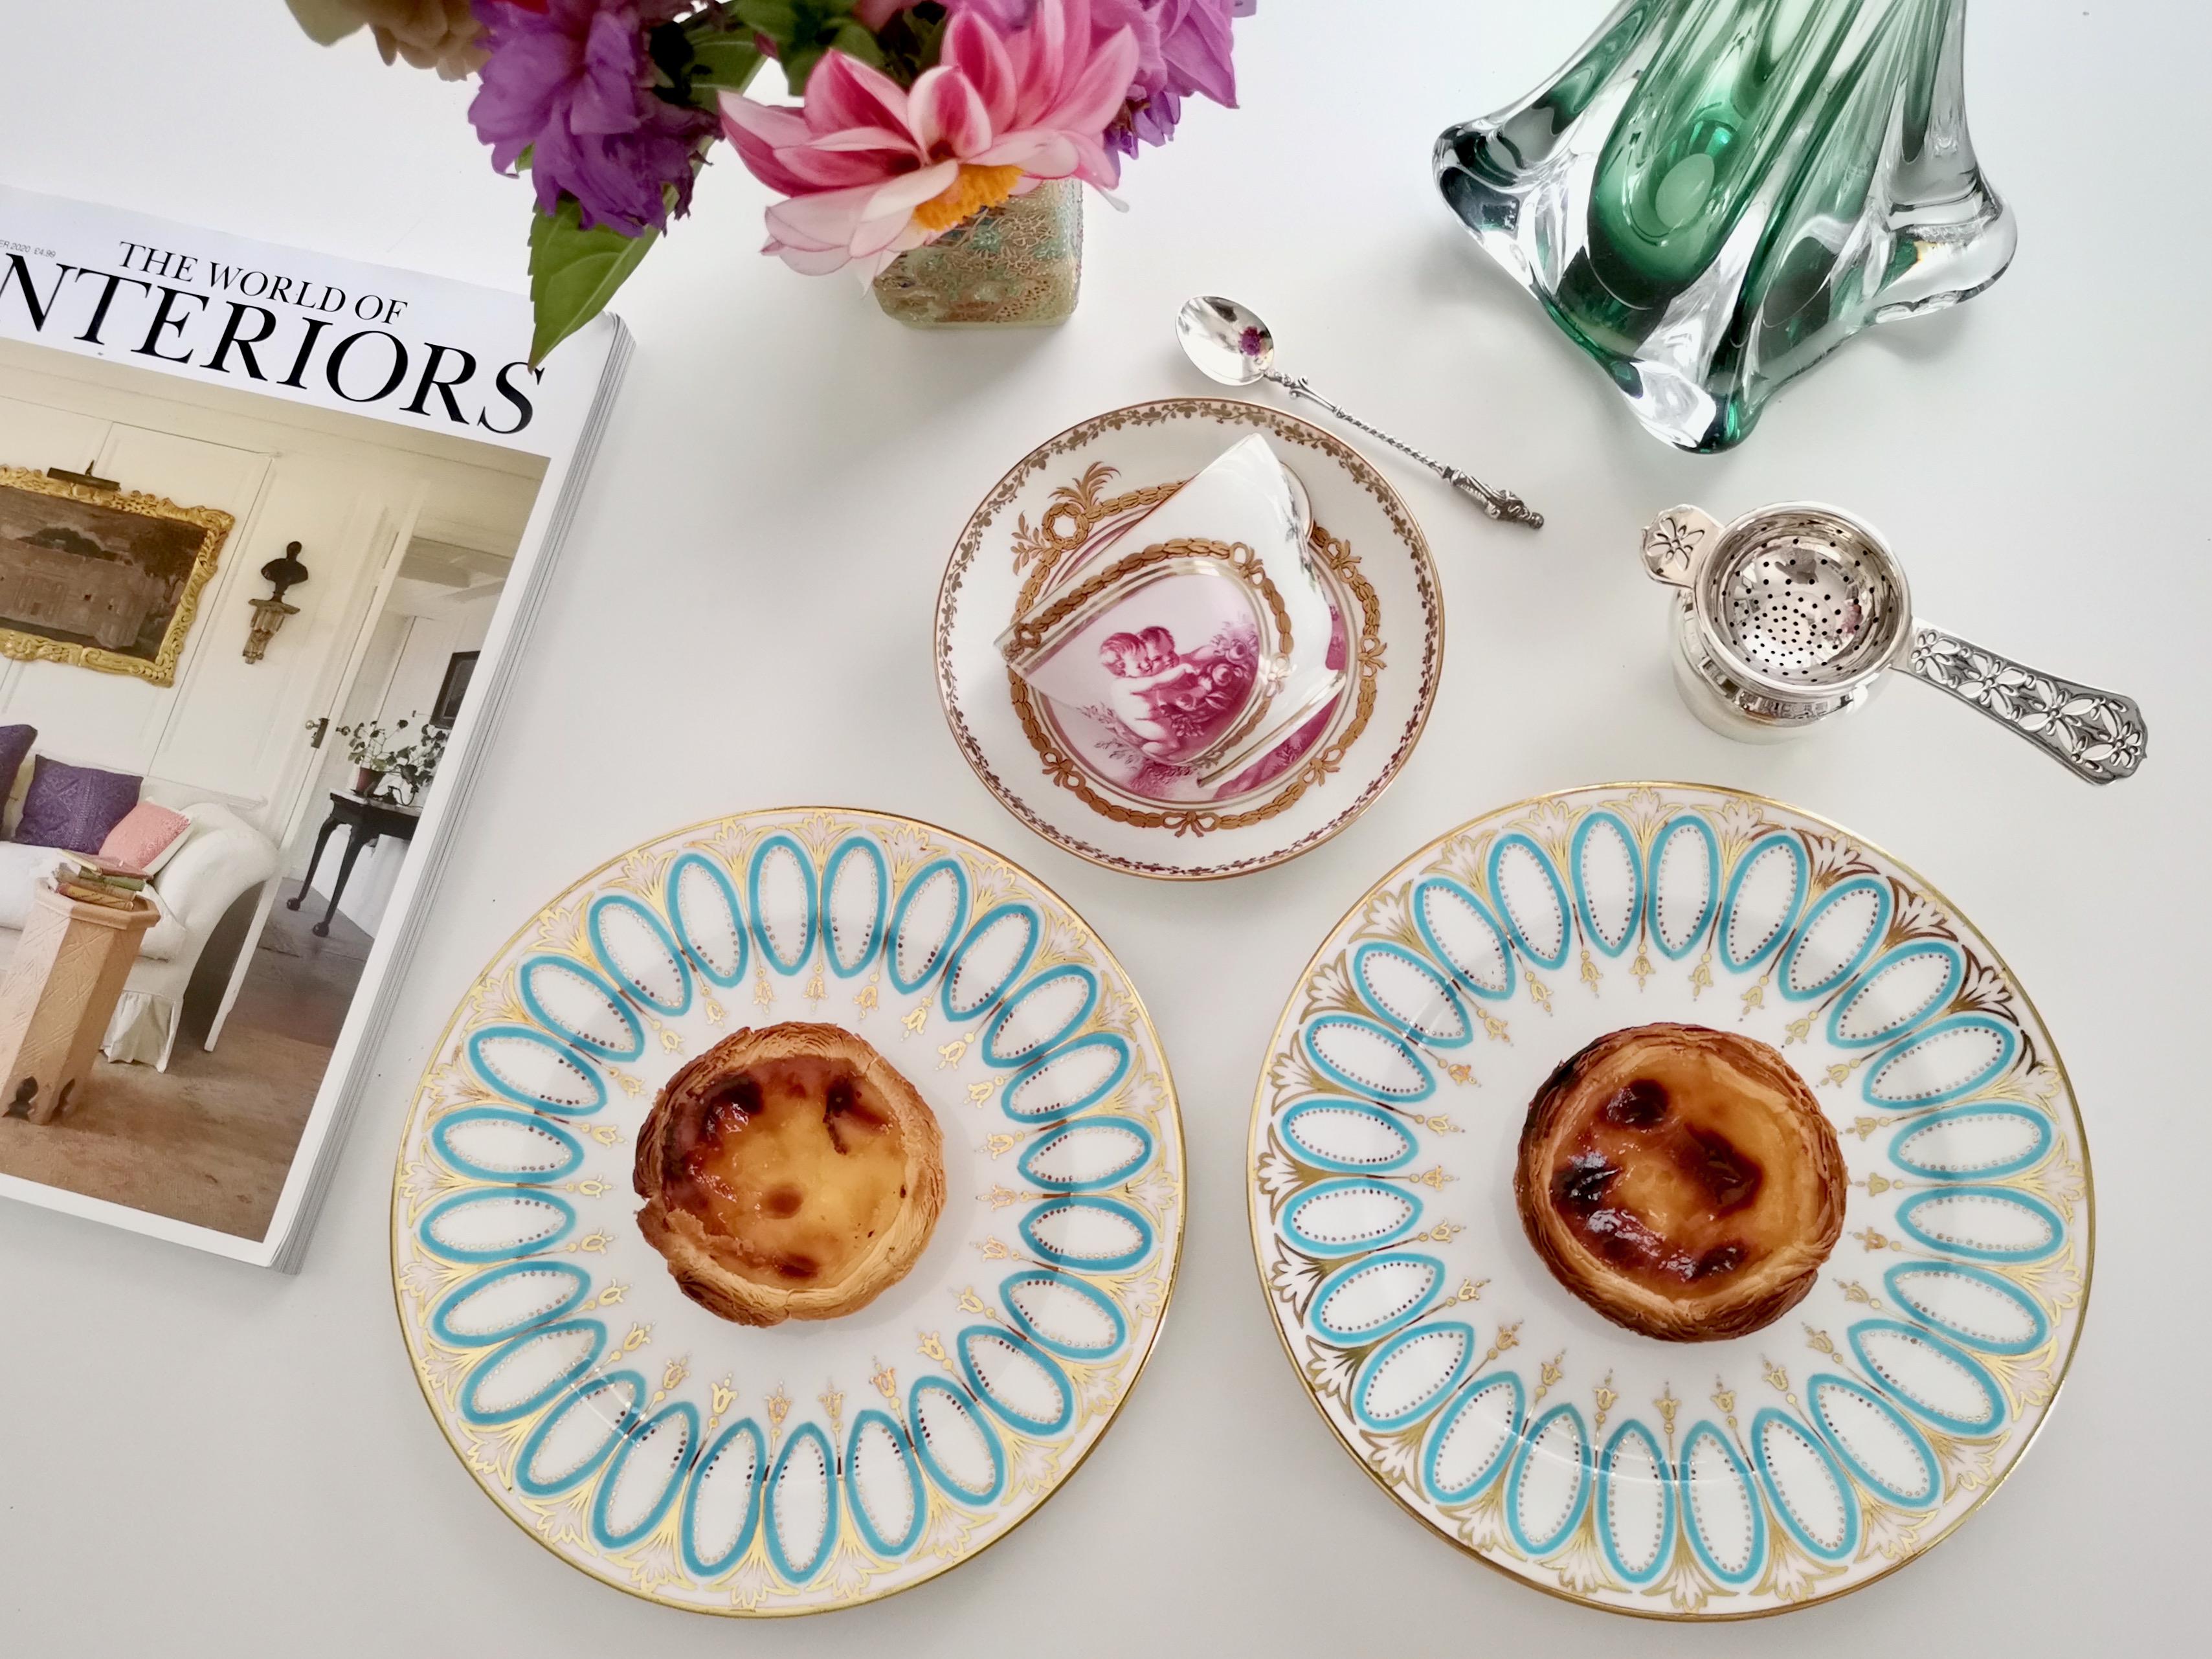 This is a beautiful pair of tea plates made by Hammersley in the early 20th century. The plates are in the Victorian / Edwardian style, decorated in turquoise and gilt. 
 
The Hammersley factory operated in Staffordshire between 1885 and 1932 and